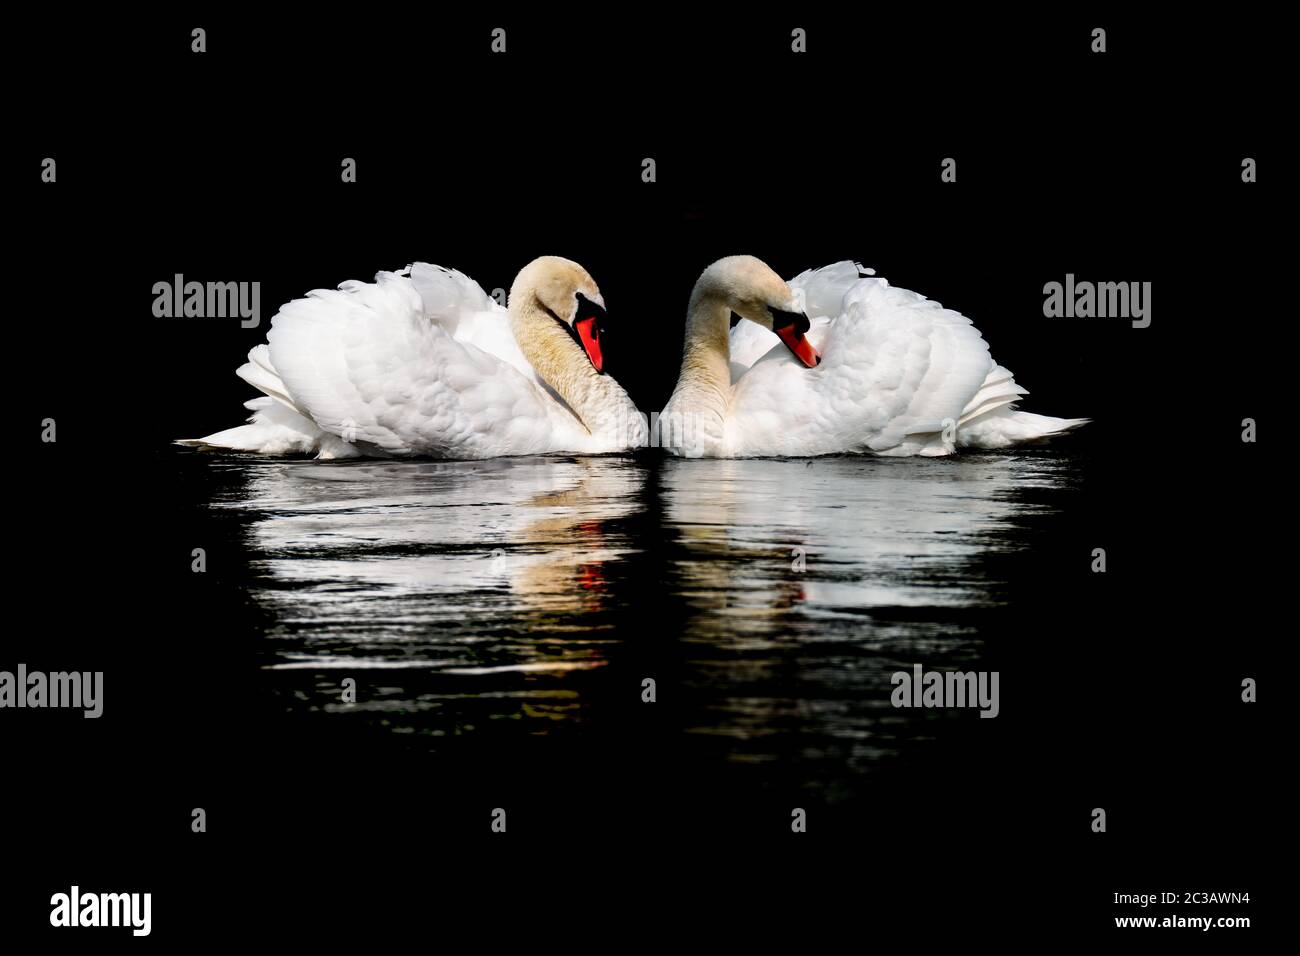 Mute swans under the moonlit night on the river in the United Kingdom Stock Photo